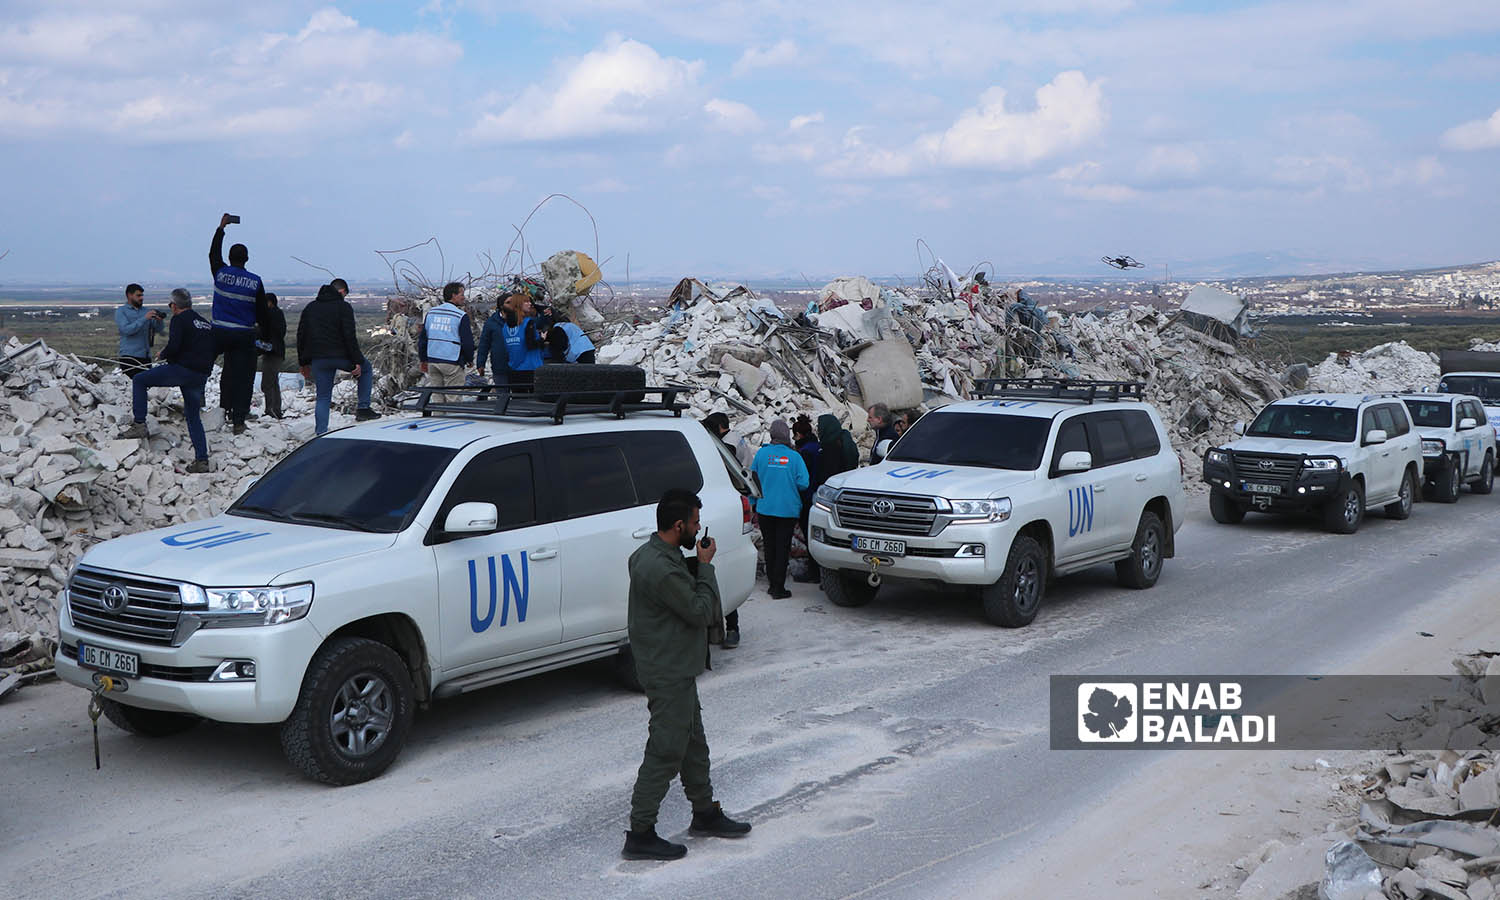 A UN delegation from various agencies during its visit to the earthquake-affected areas in the city of Harem in the countryside of Idlib - February 21, 2023 (Enab Baladi/Mohammad Nasan Dabel)